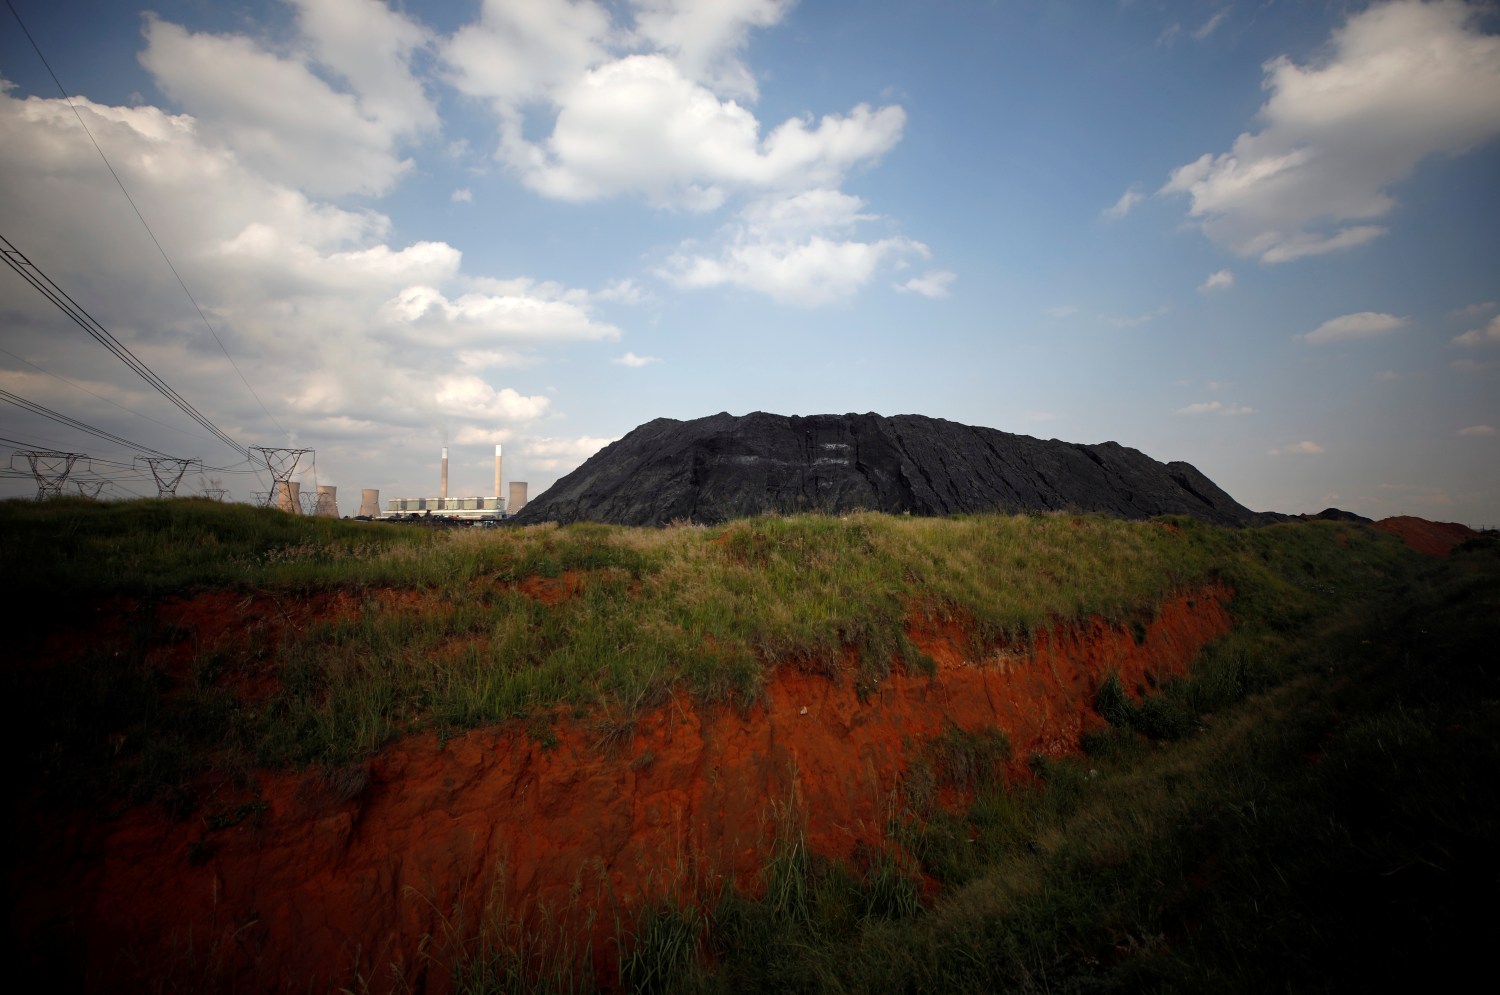 A heap of coal is seen beside a power station owned by state power utility Eskom in Duhva, South Africa, February 18, 2020. Picture taken February 18, 2020. REUTERS/Mike Hutchings